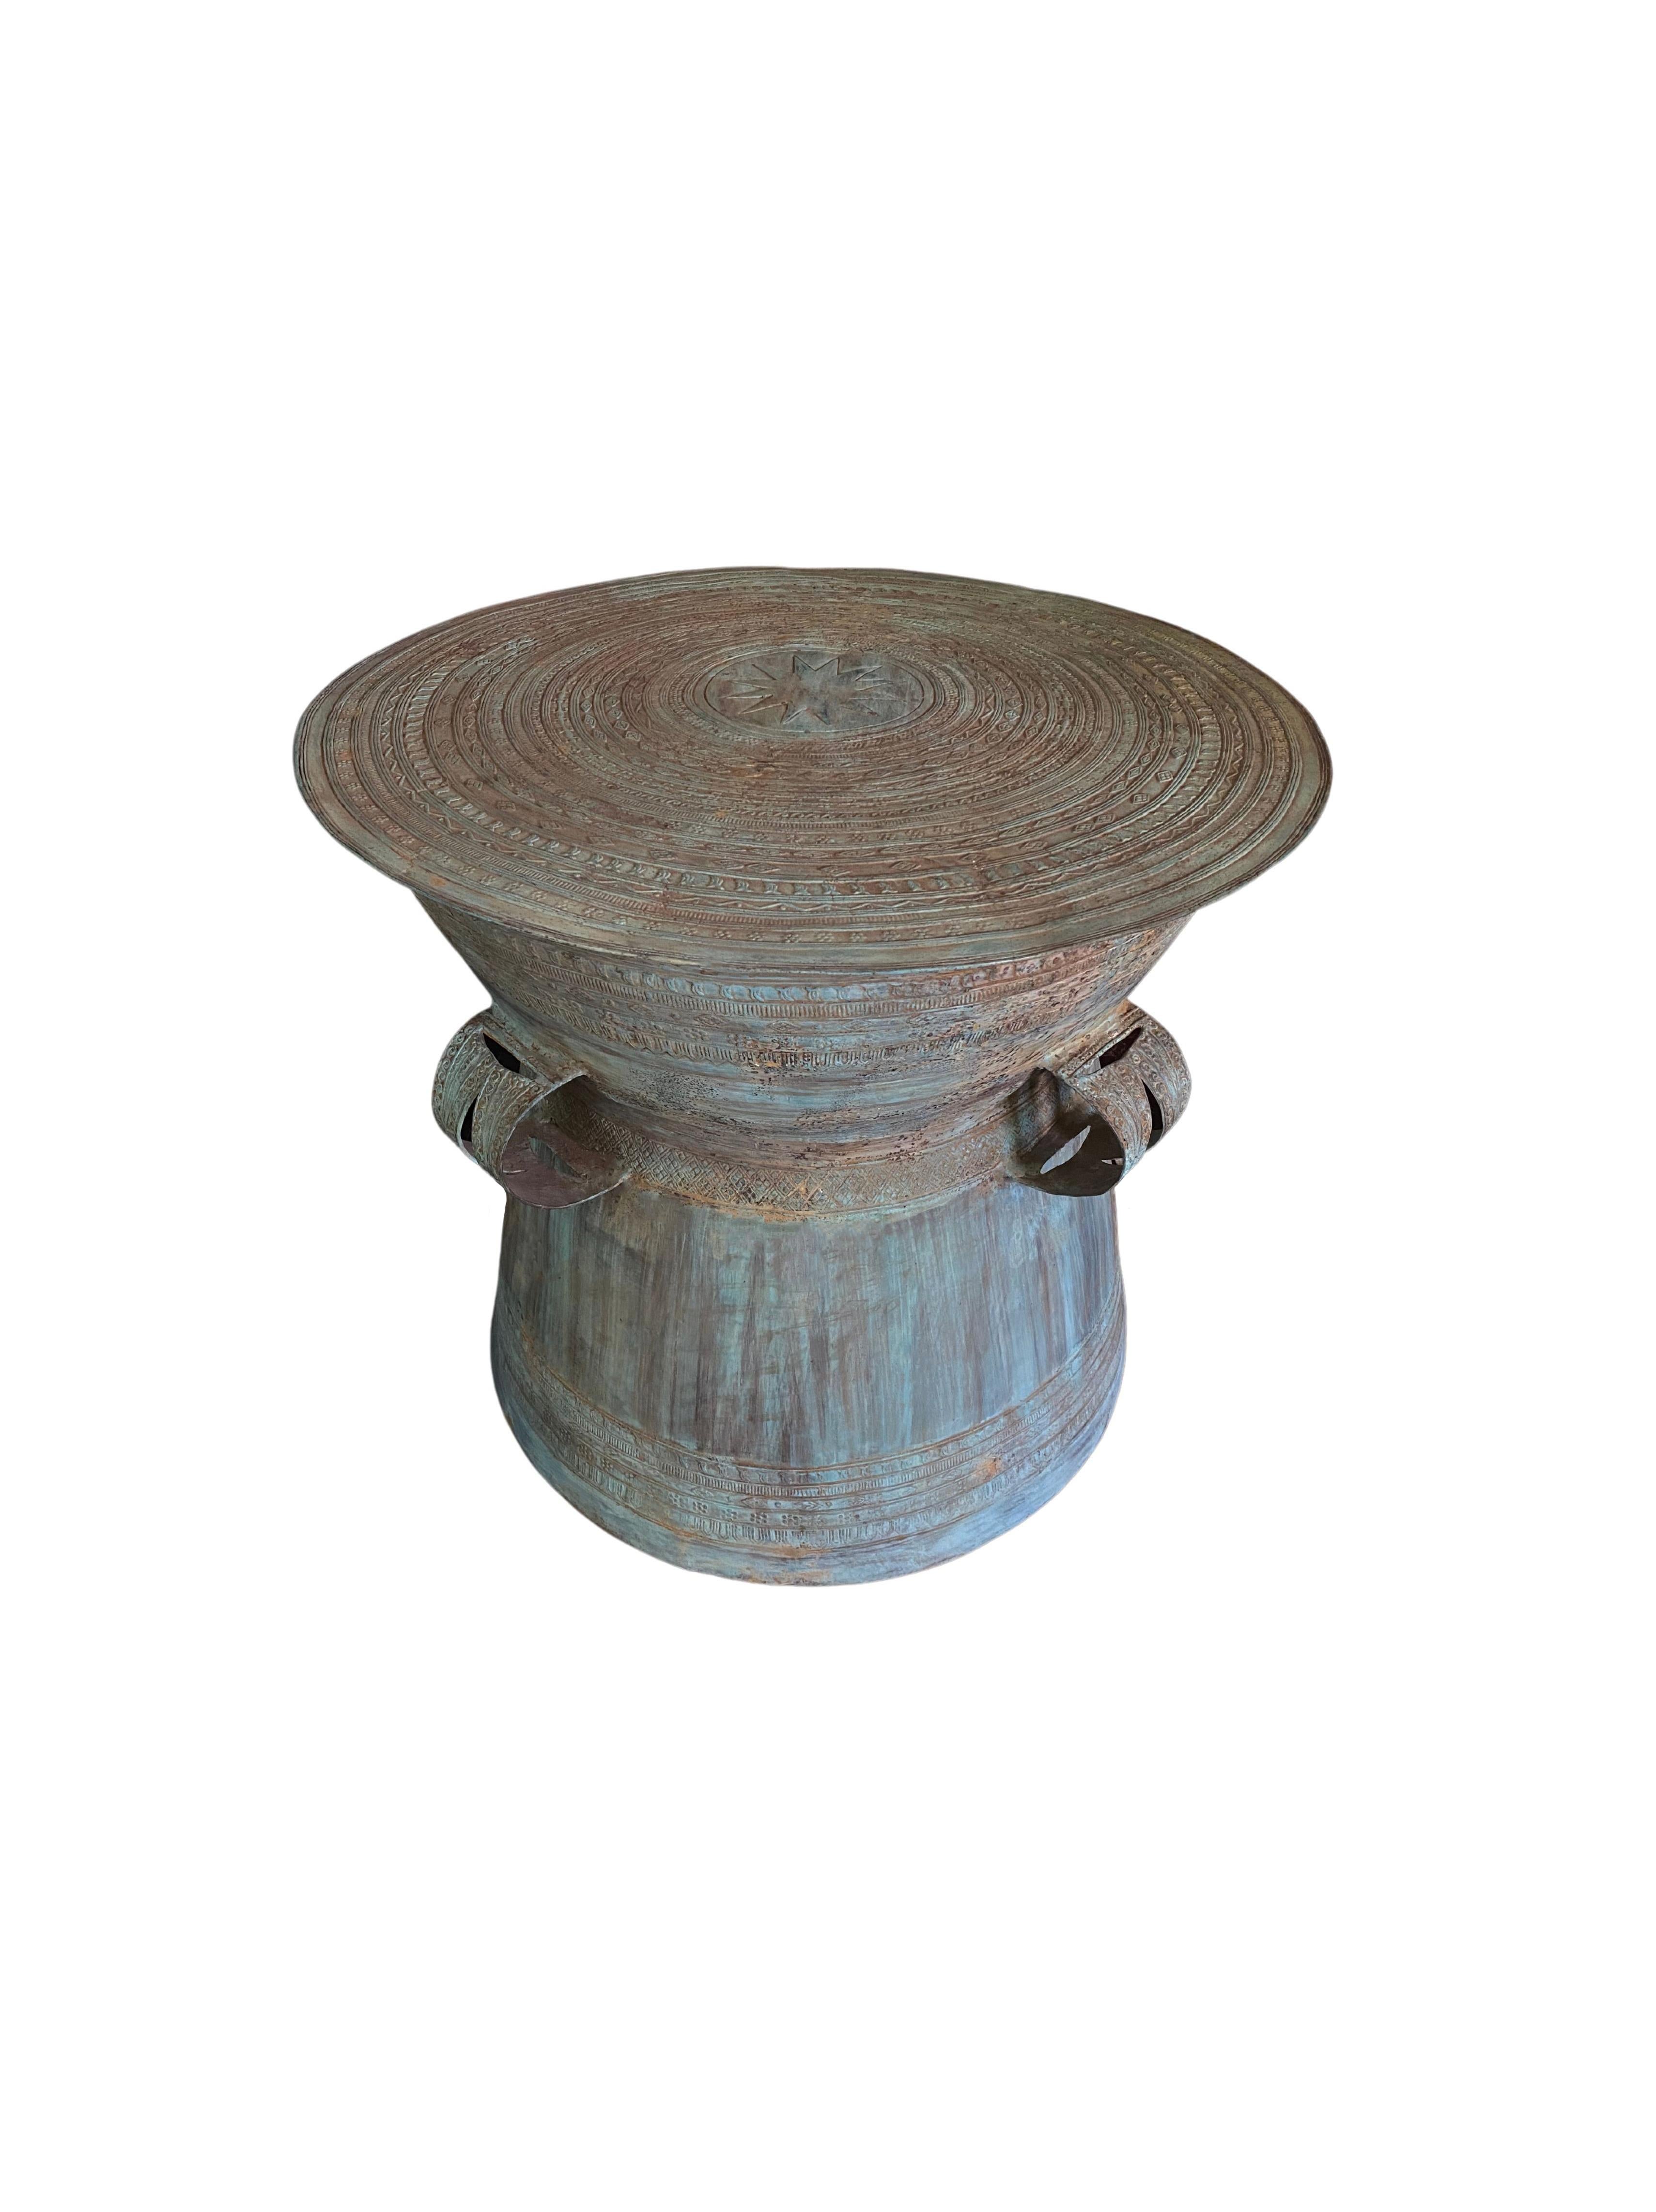 This cast iron bronze drum is inspired by the rain drums of South East Asia, particular those found in Burma, Laos and some of the Eastern Islands of Indonesia. This drum features three engraved handles. There are elaborate engravings on its sides